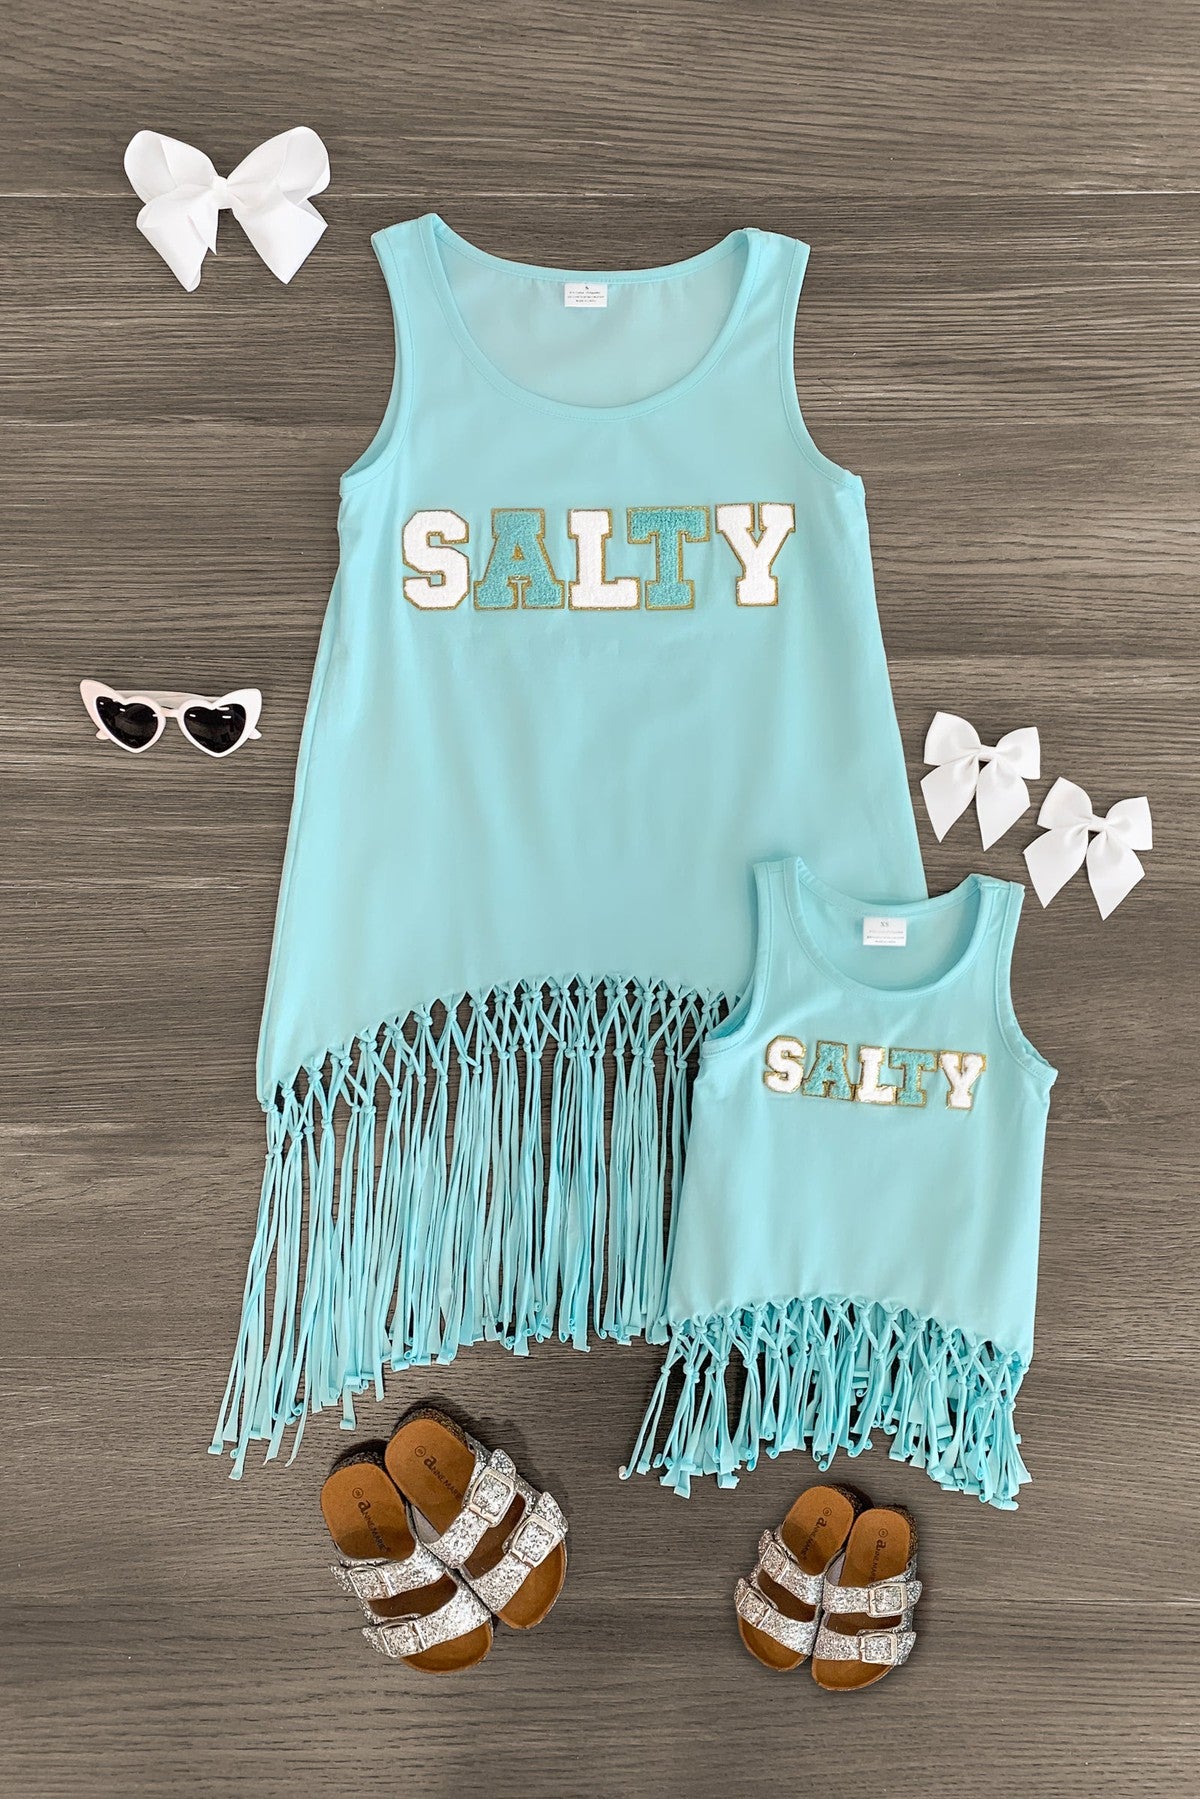 Mom & Me - "Salty" Chenille Patch Tank Top - Sparkle in Pink